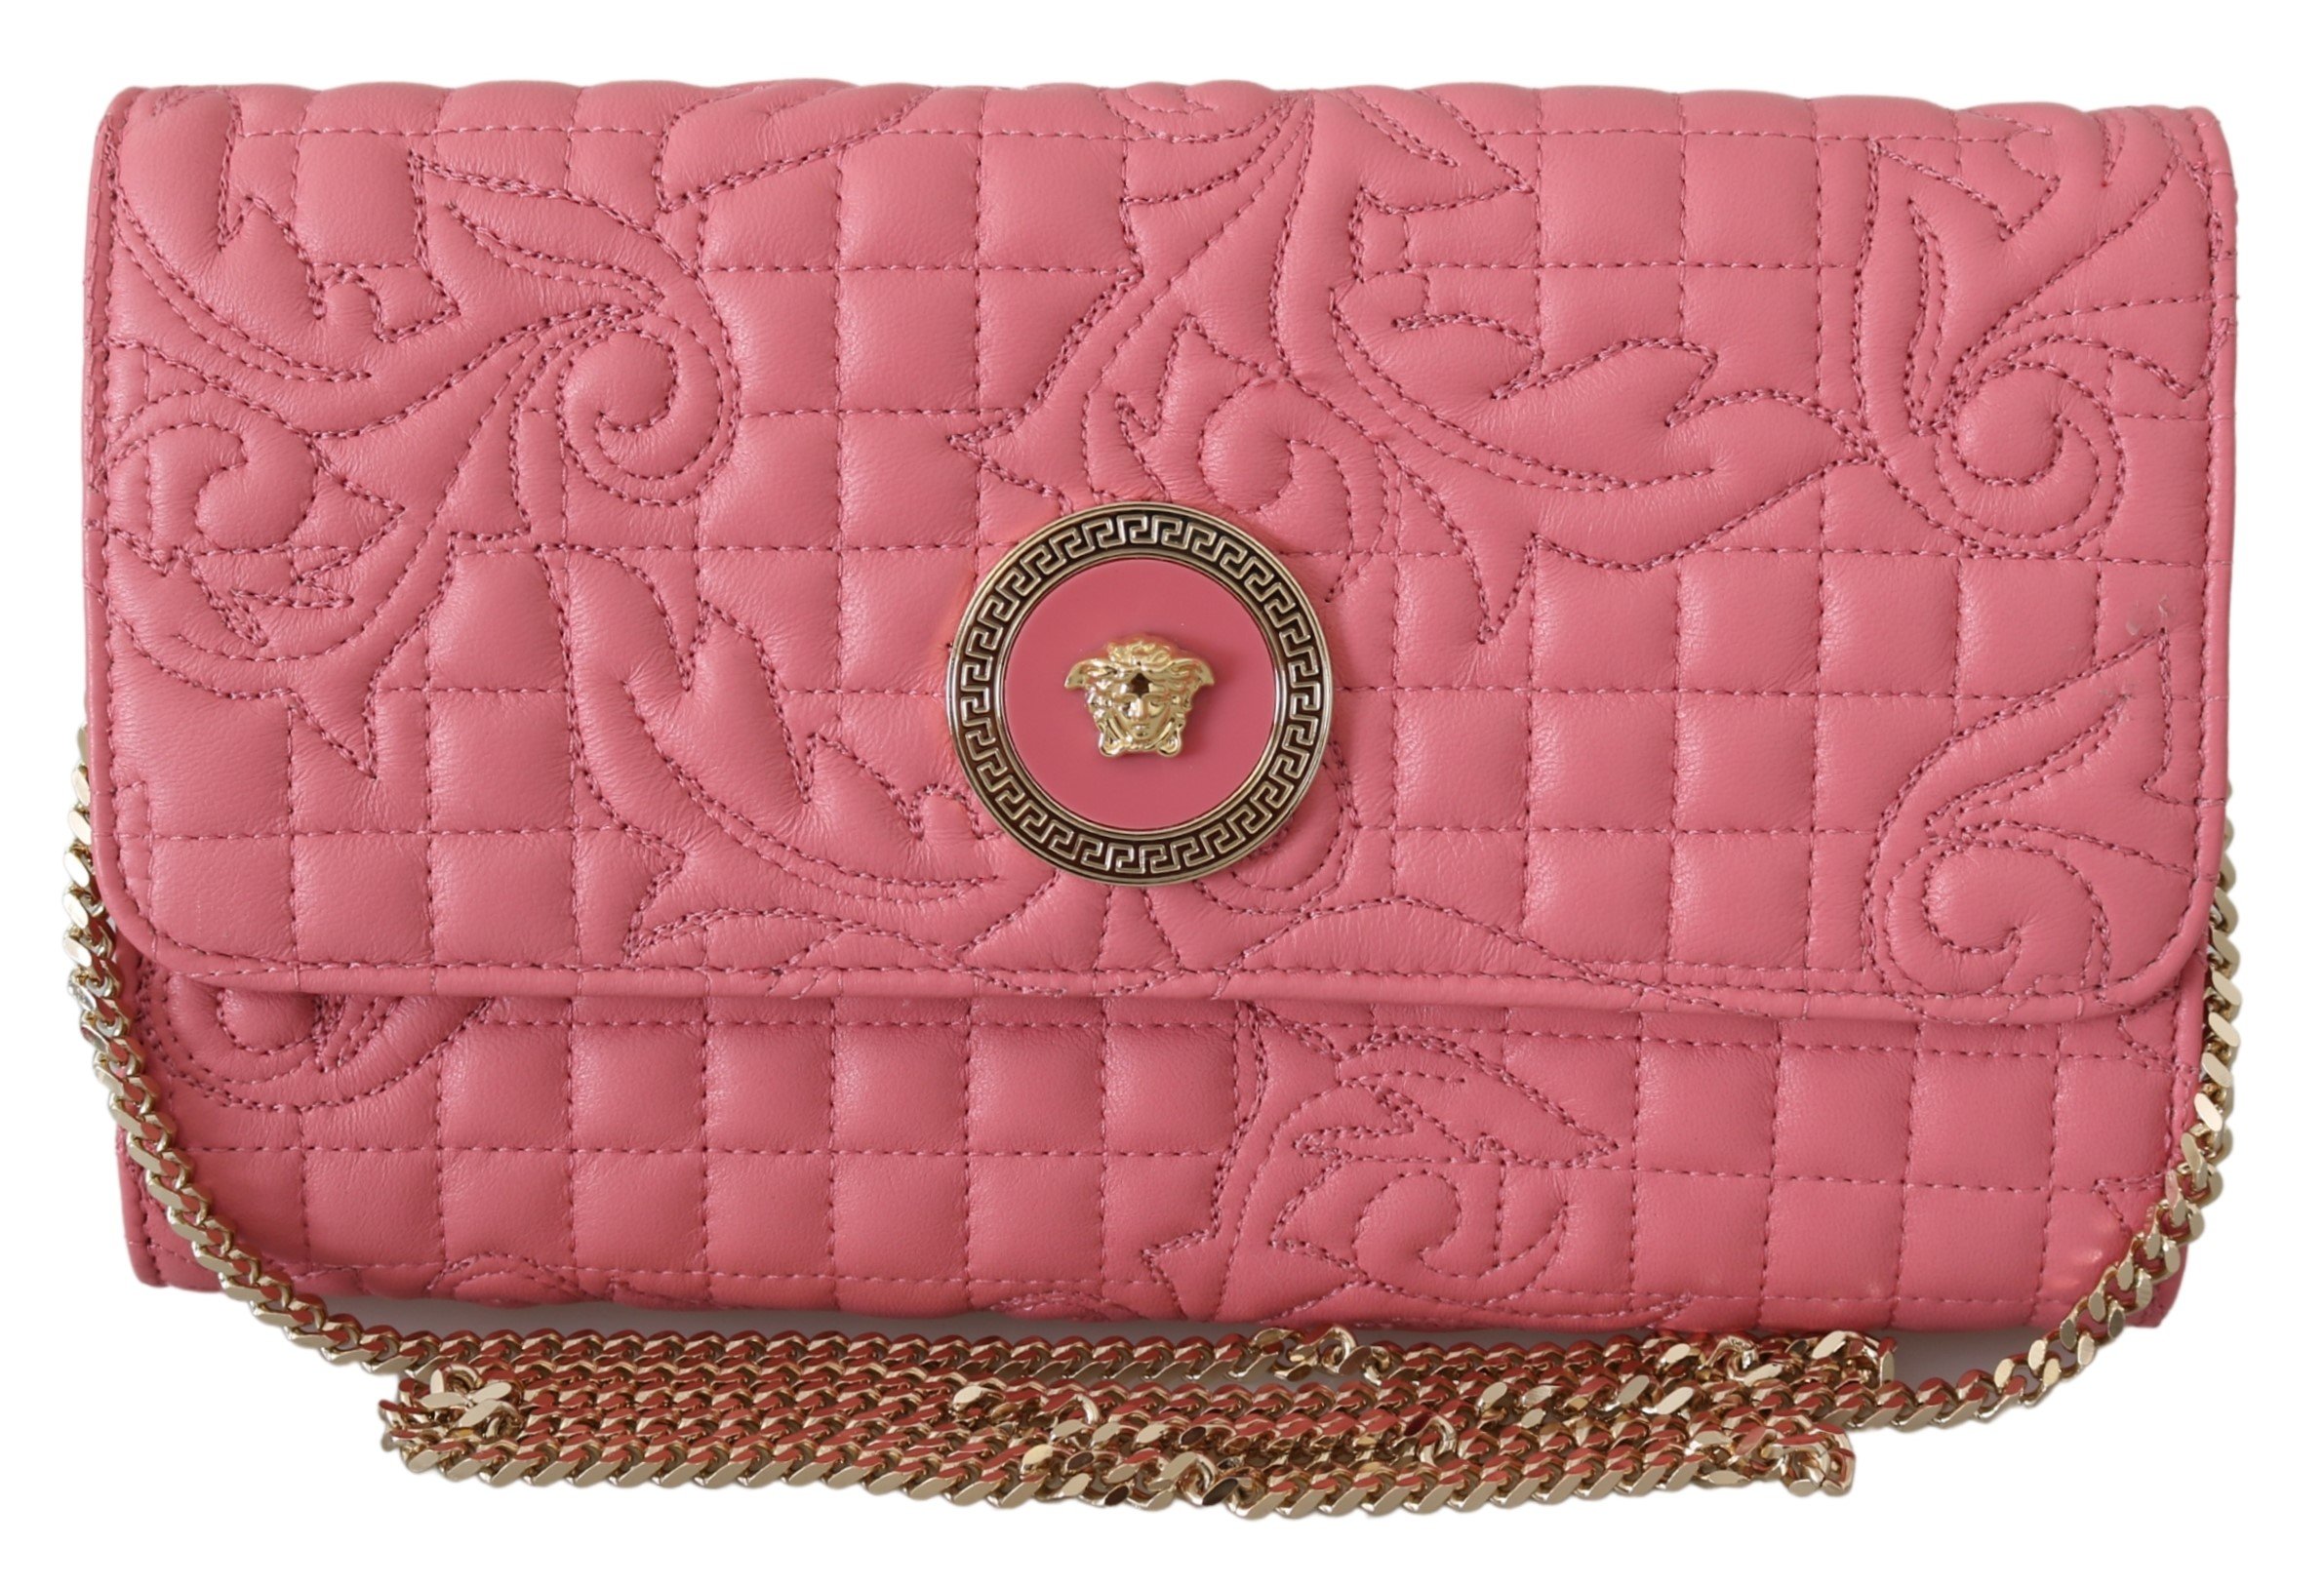 Versace Women's Quilted Nappa Leather Handbag Pink 8053850414079